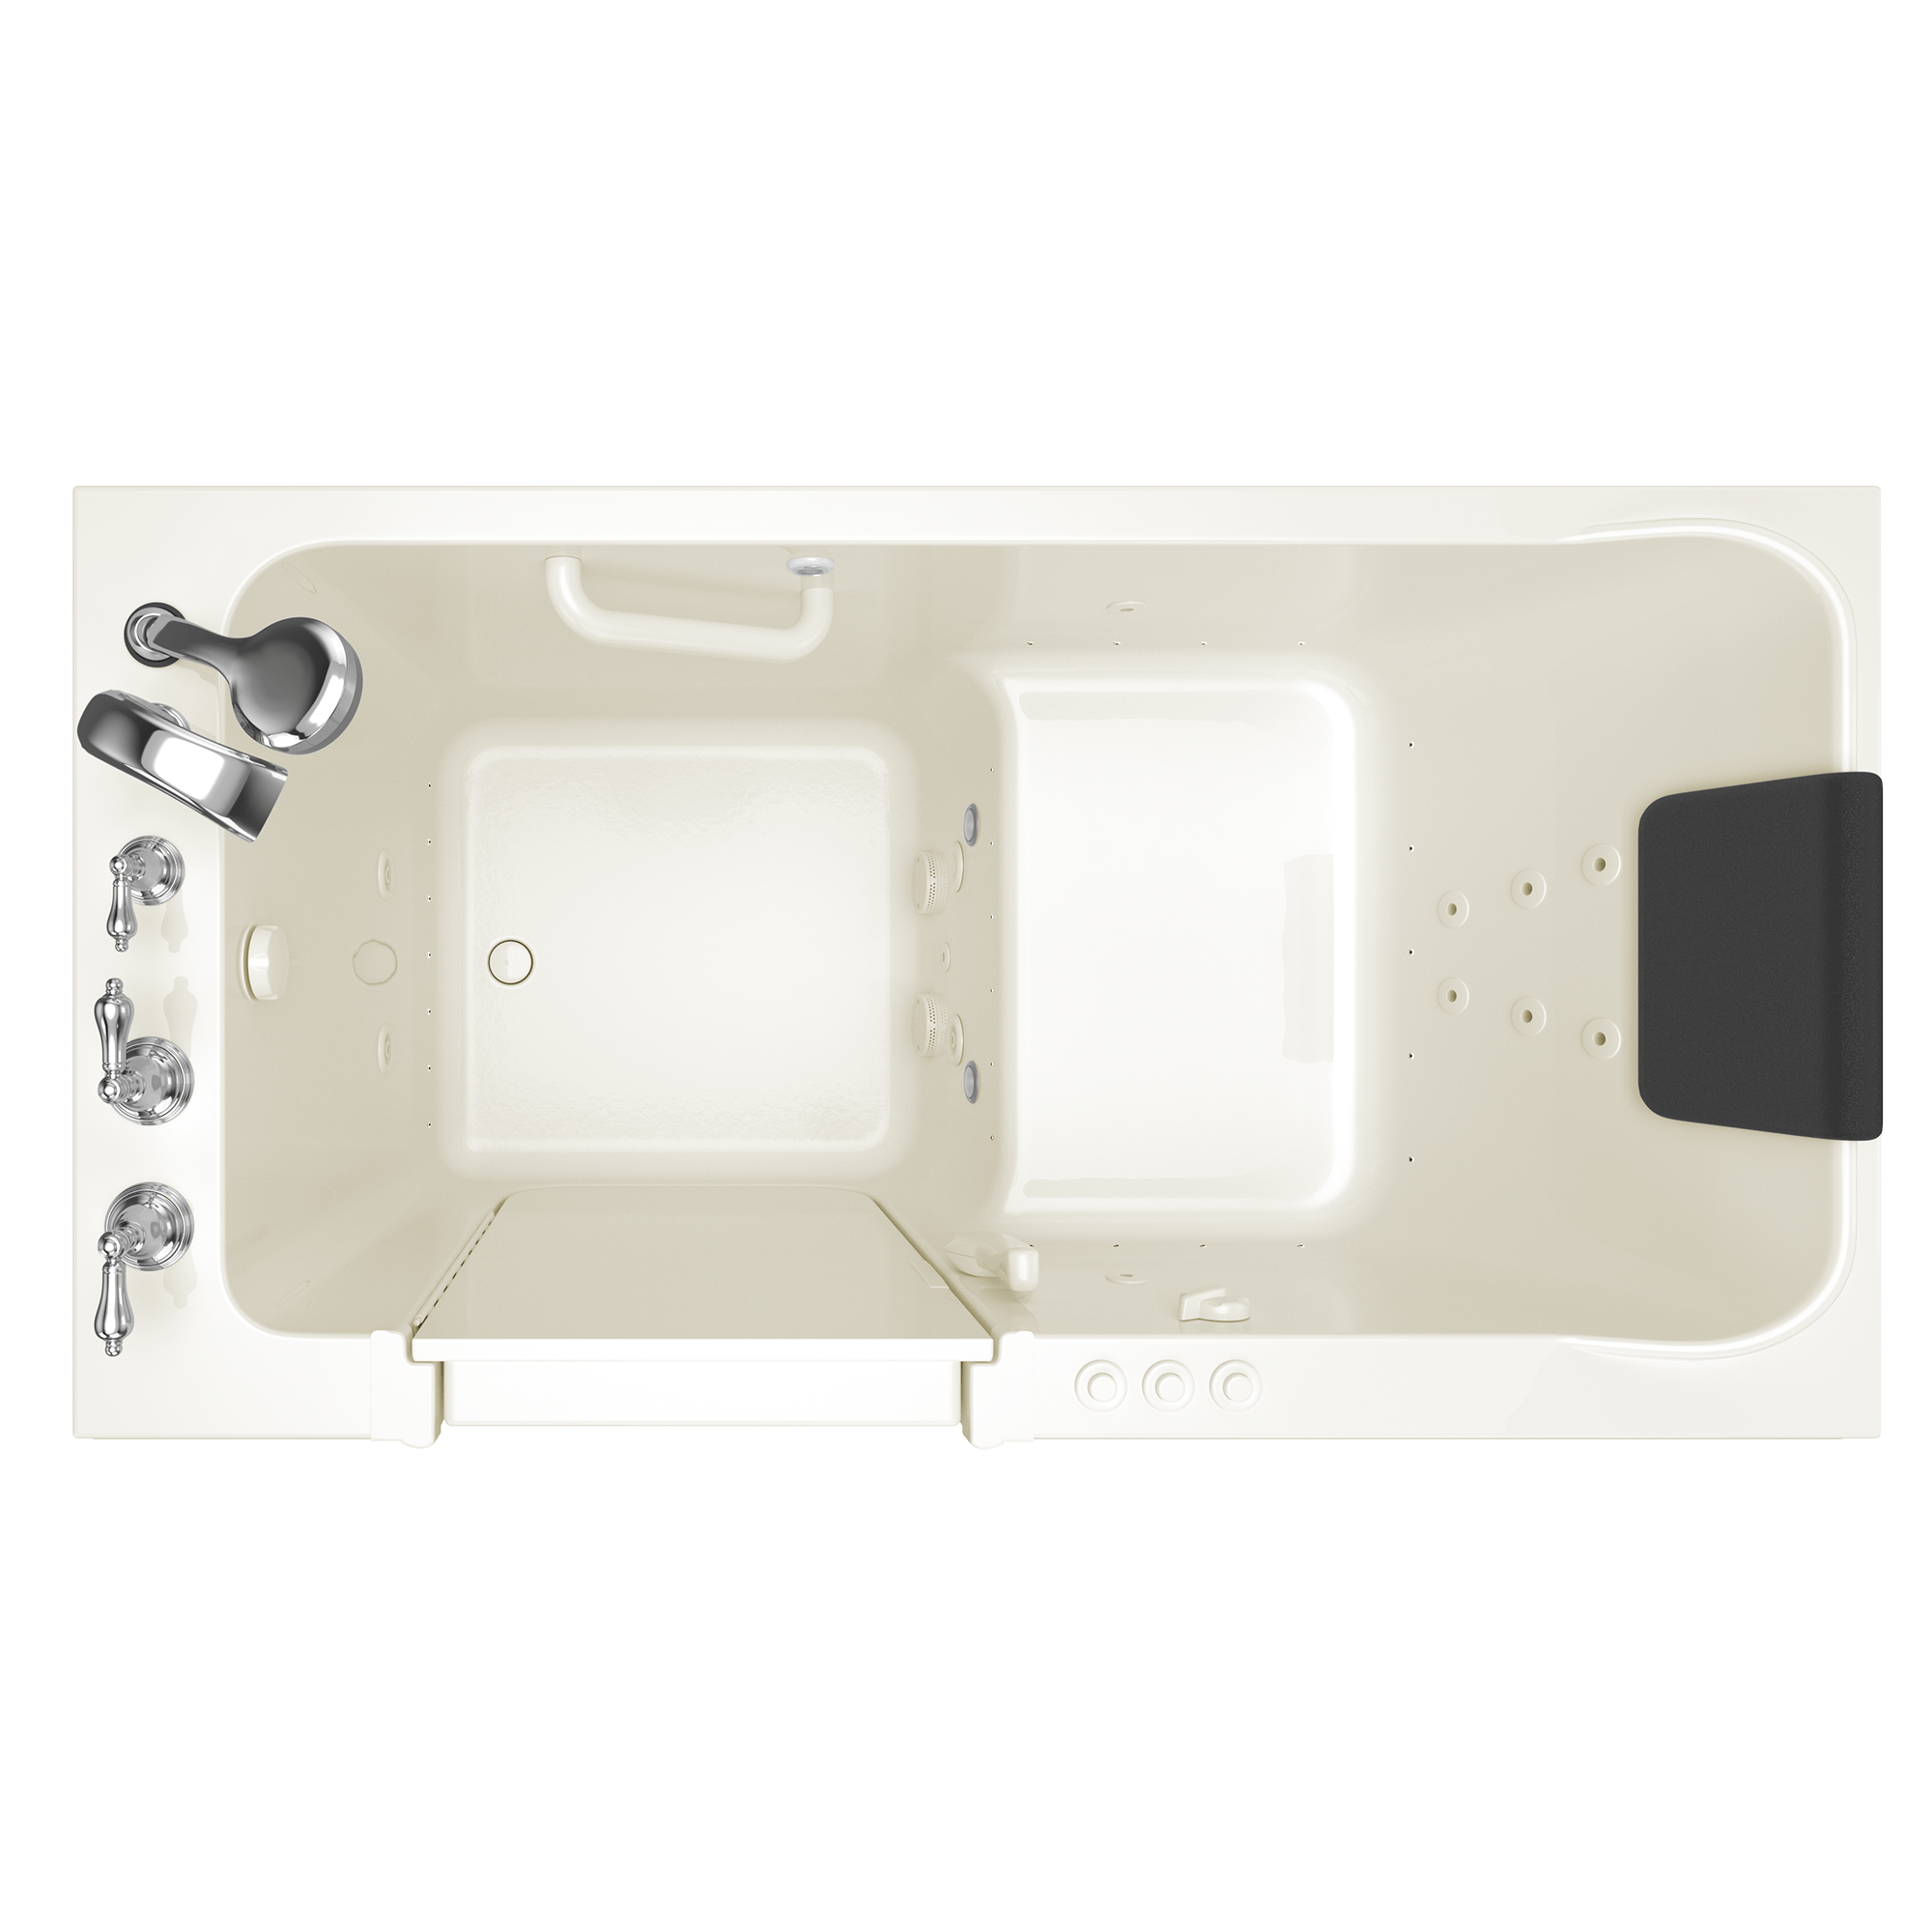 Acrylic Luxury Series 32 x 60 -Inch Walk-in Tub With Combination Air Spa and Whirlpool Systems - Left-Hand Drain With Faucet